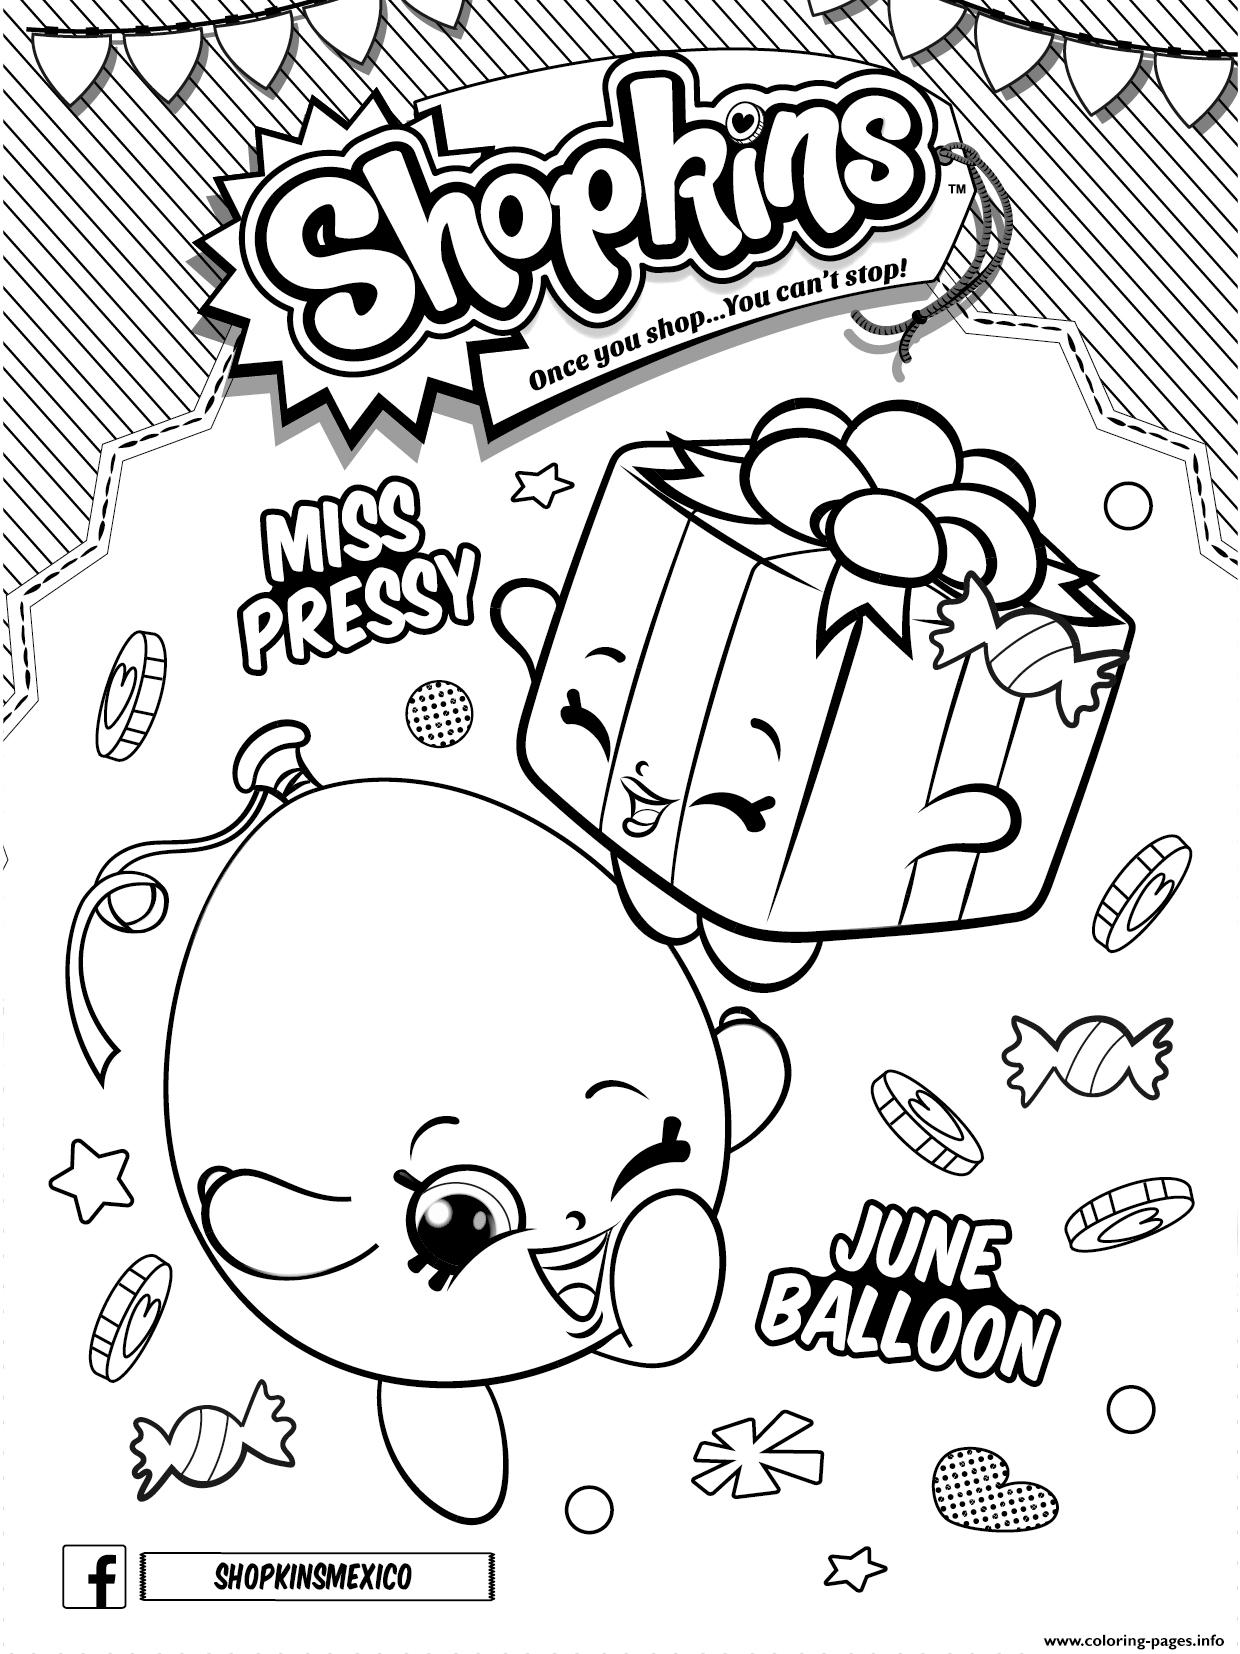 Shopkins Party Miss Pressy June Balloon coloring